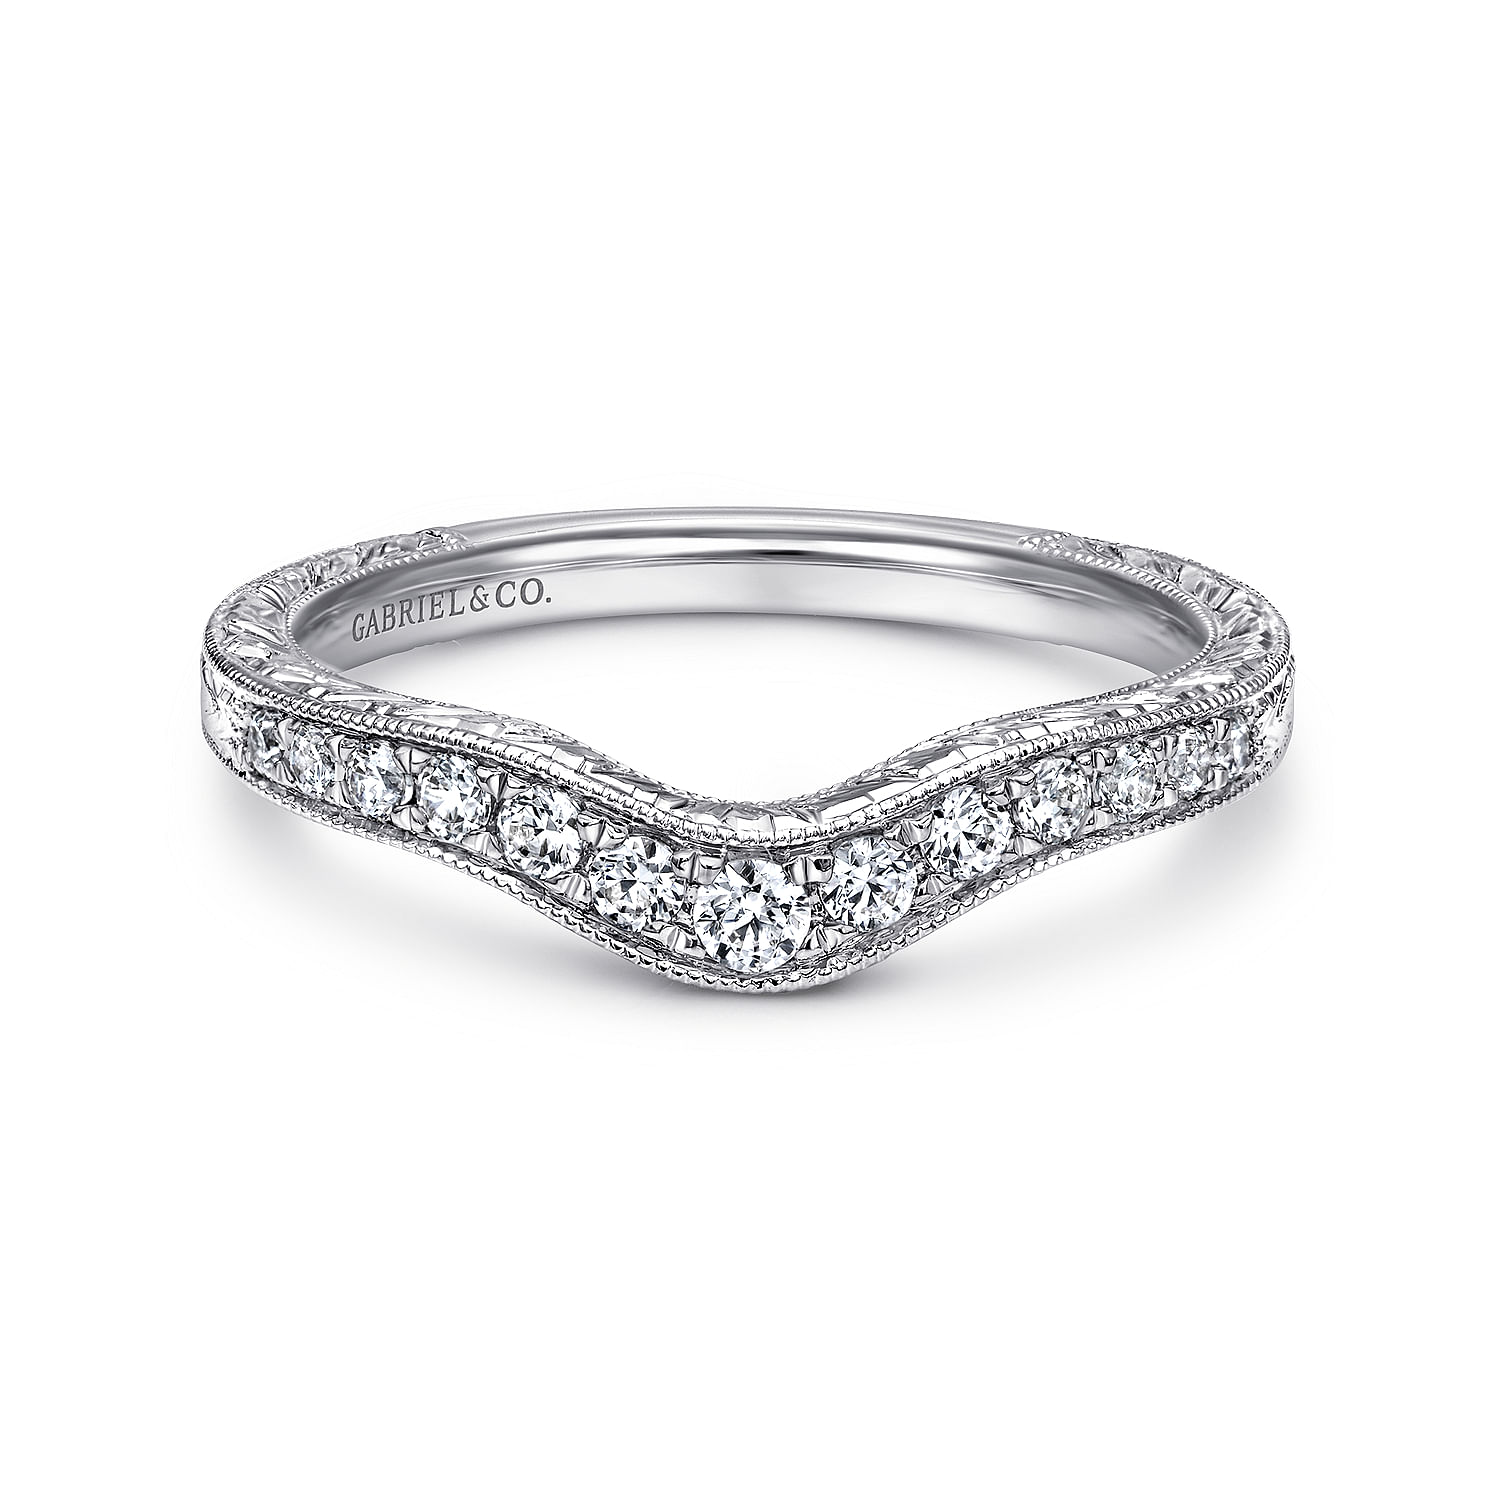 Gabriel - Vintage Inspired Curved 14K White Gold Diamond Wedding Band with Engraving